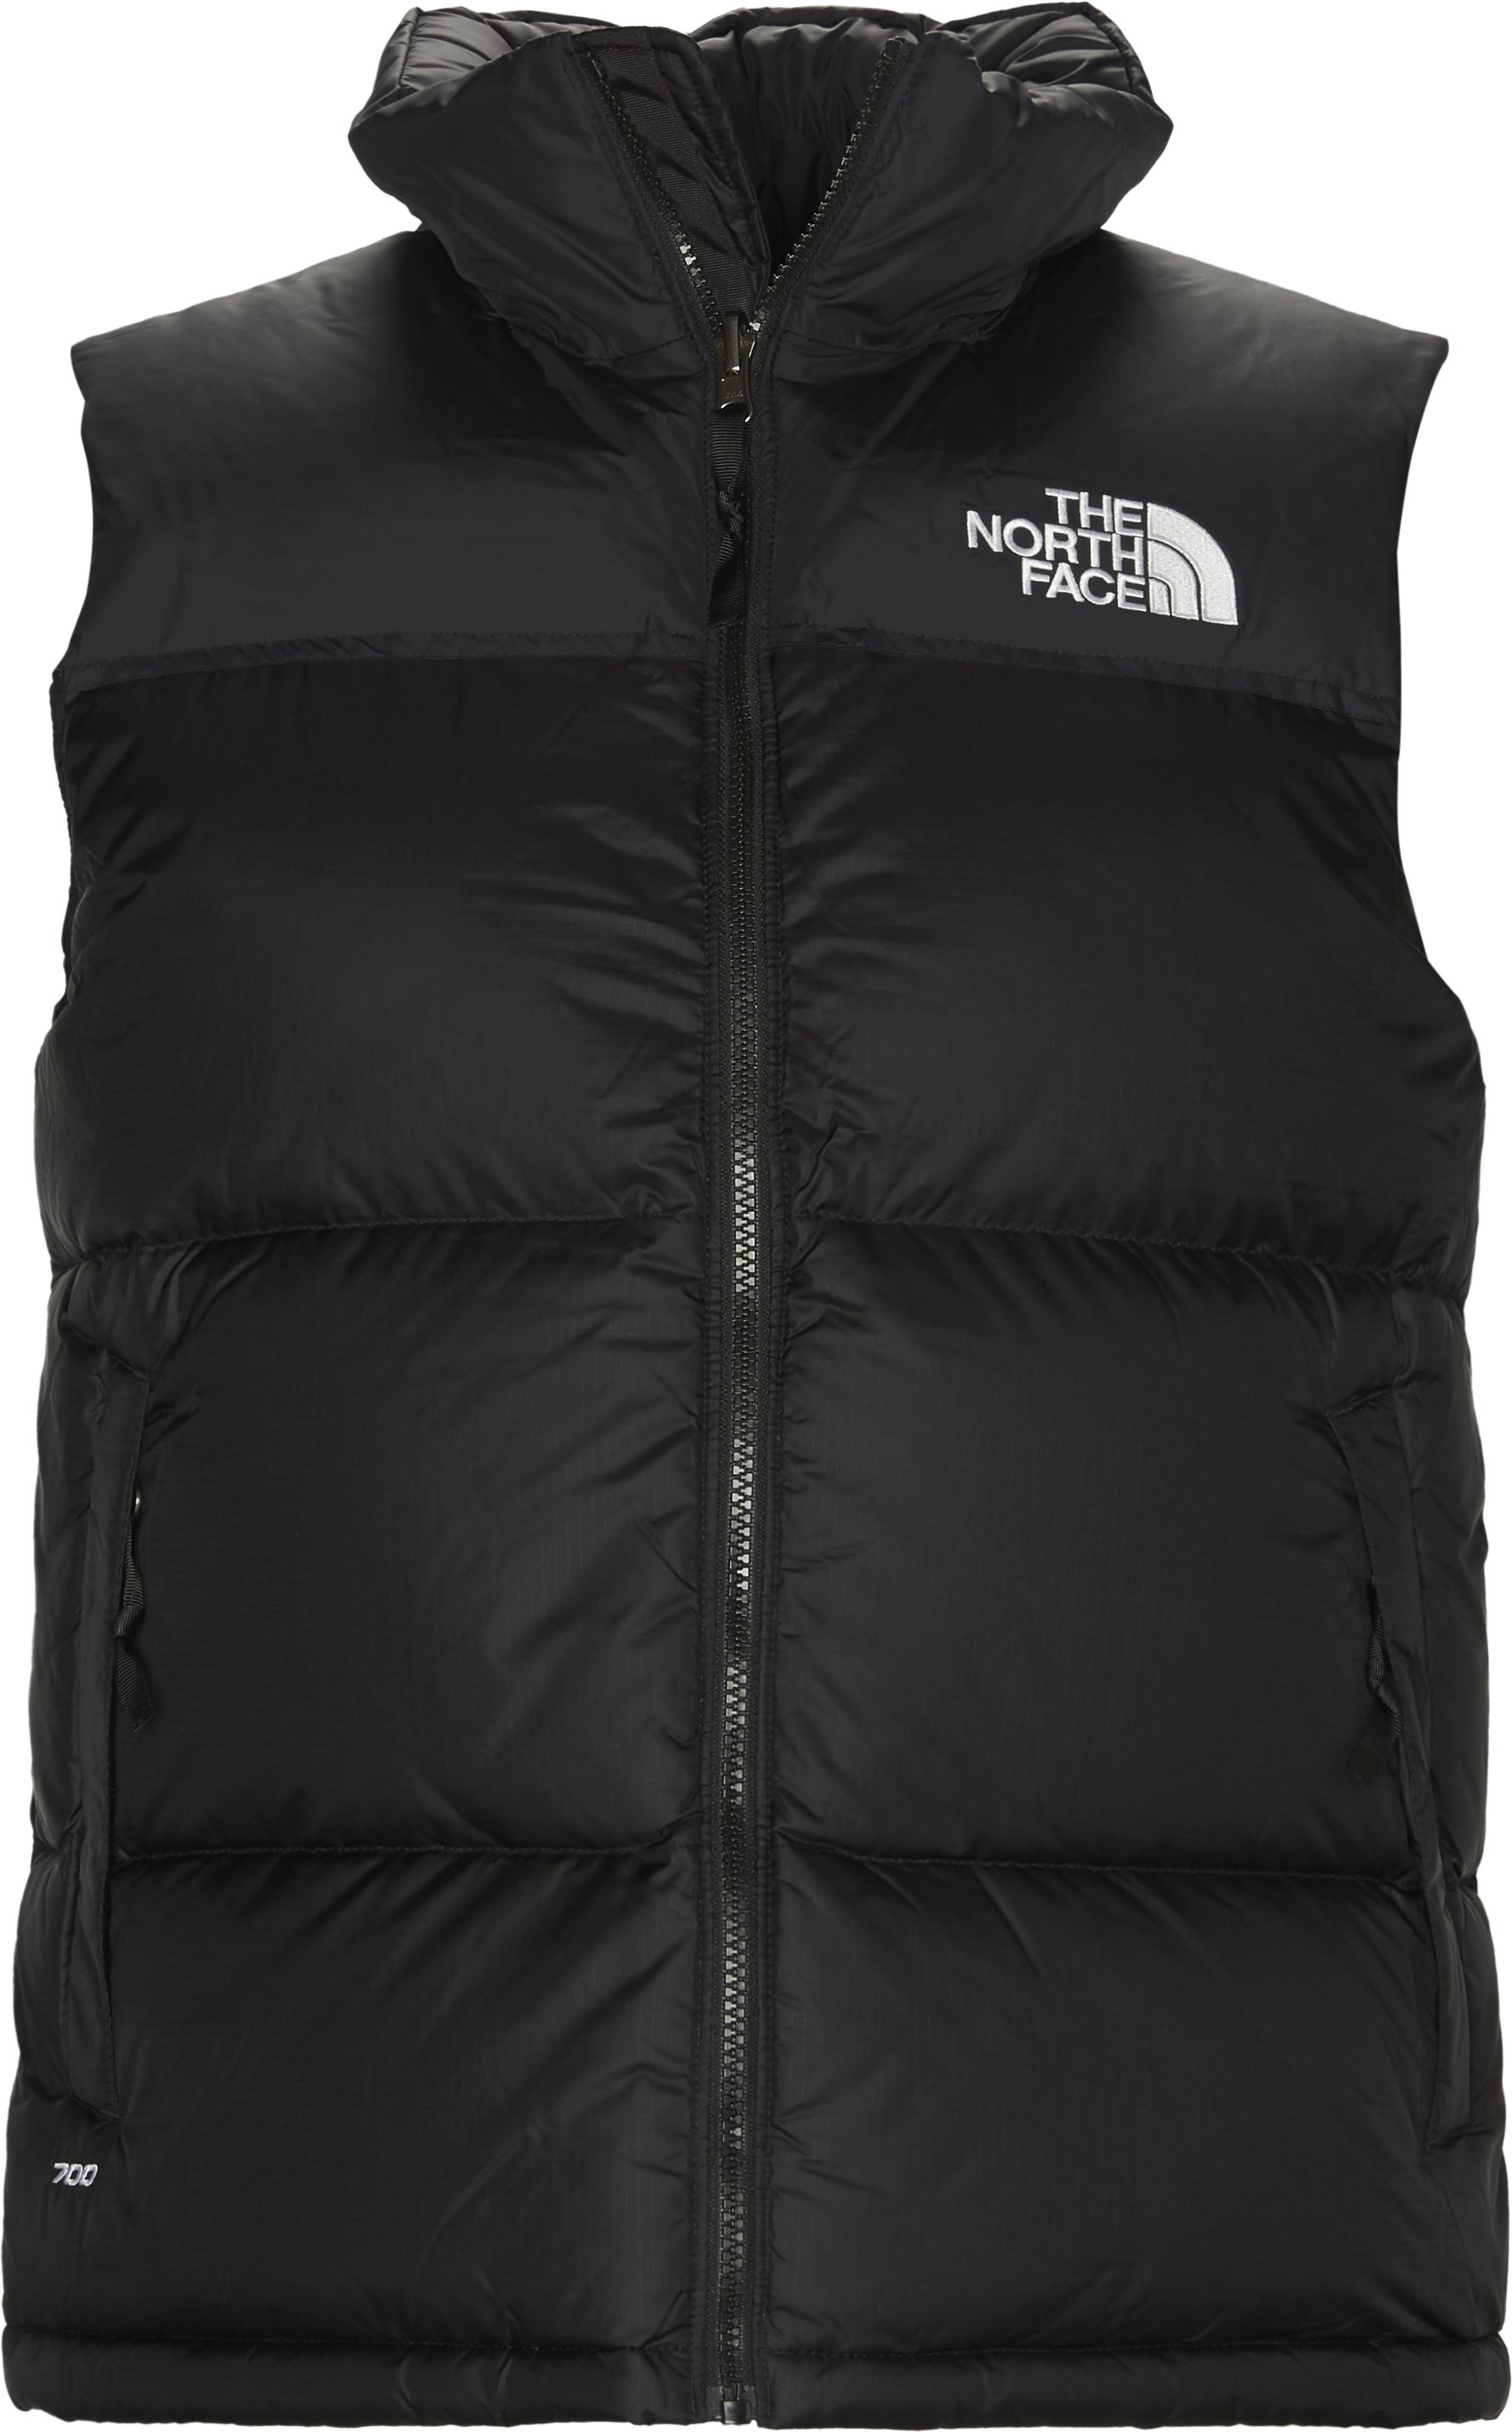 1996 RETRO NUPTSE Vests SORT from The North Face EUR